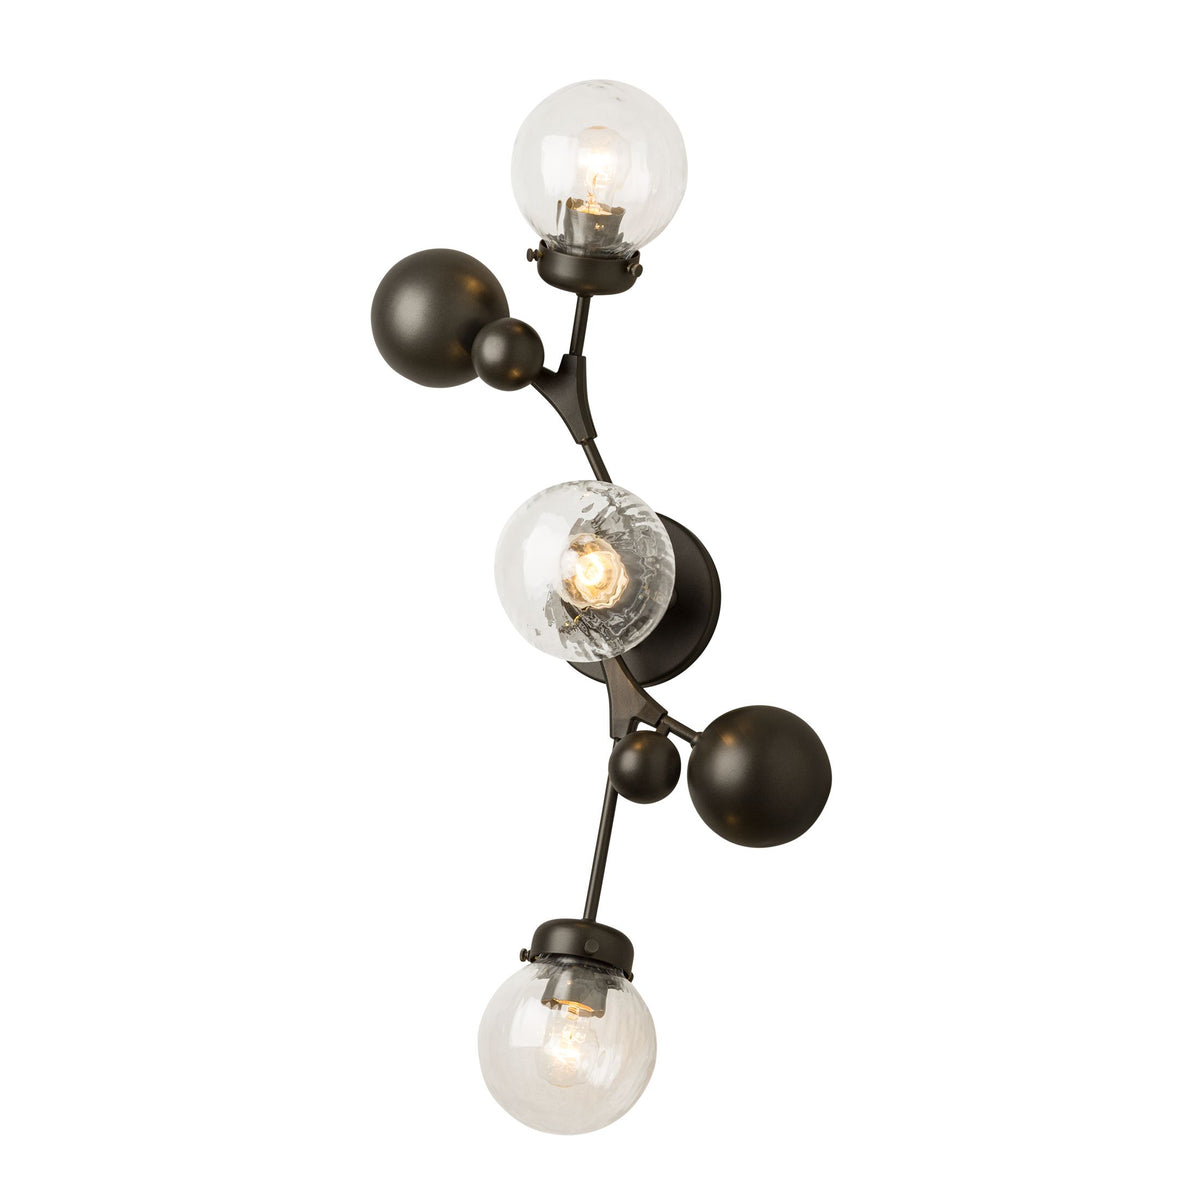 Hubbardton Forge Sprig Wall Sconce